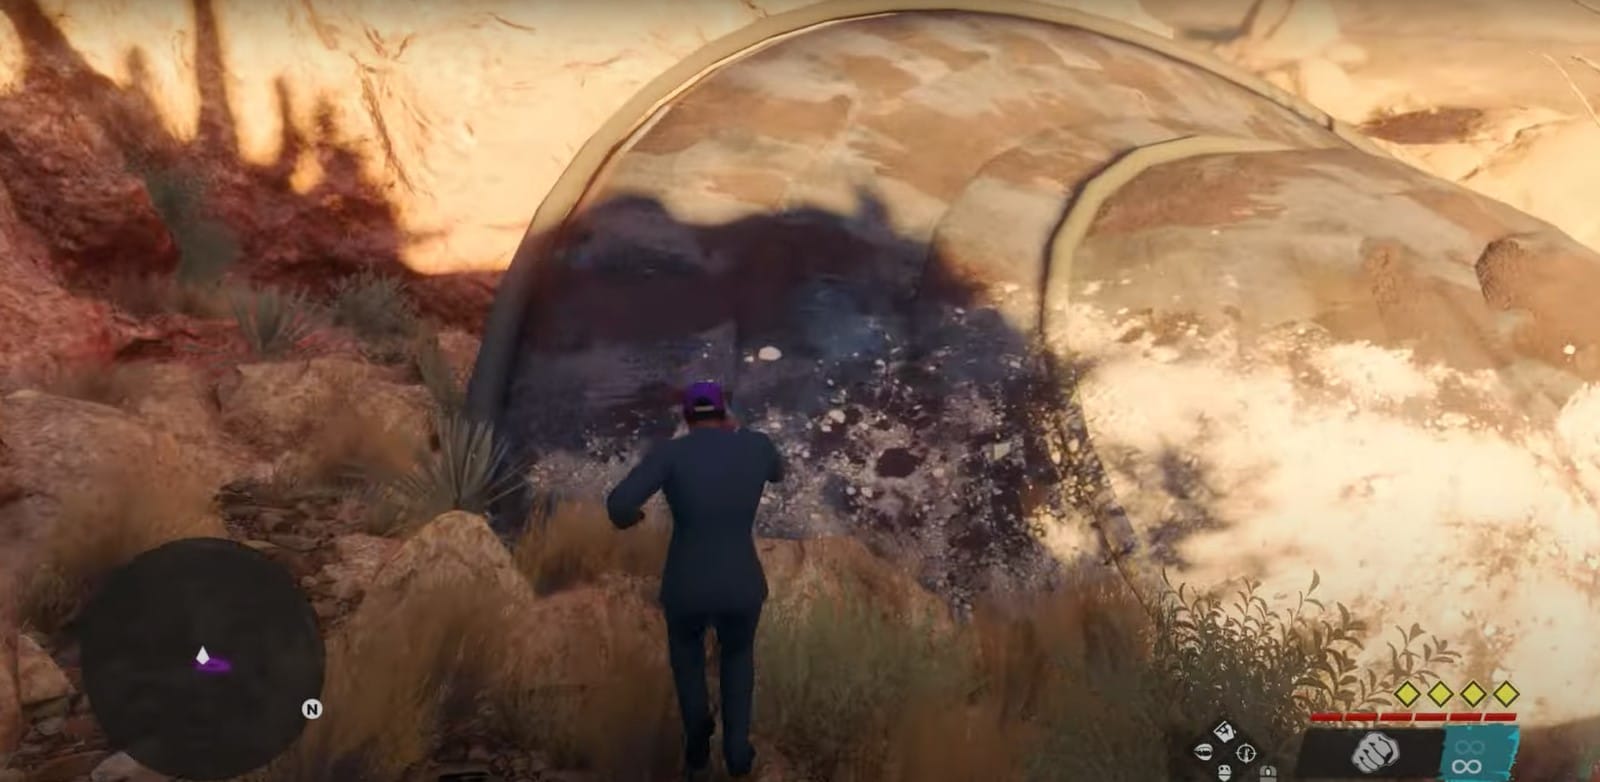 A crashed UFO found in the desert in Saints Row 2022